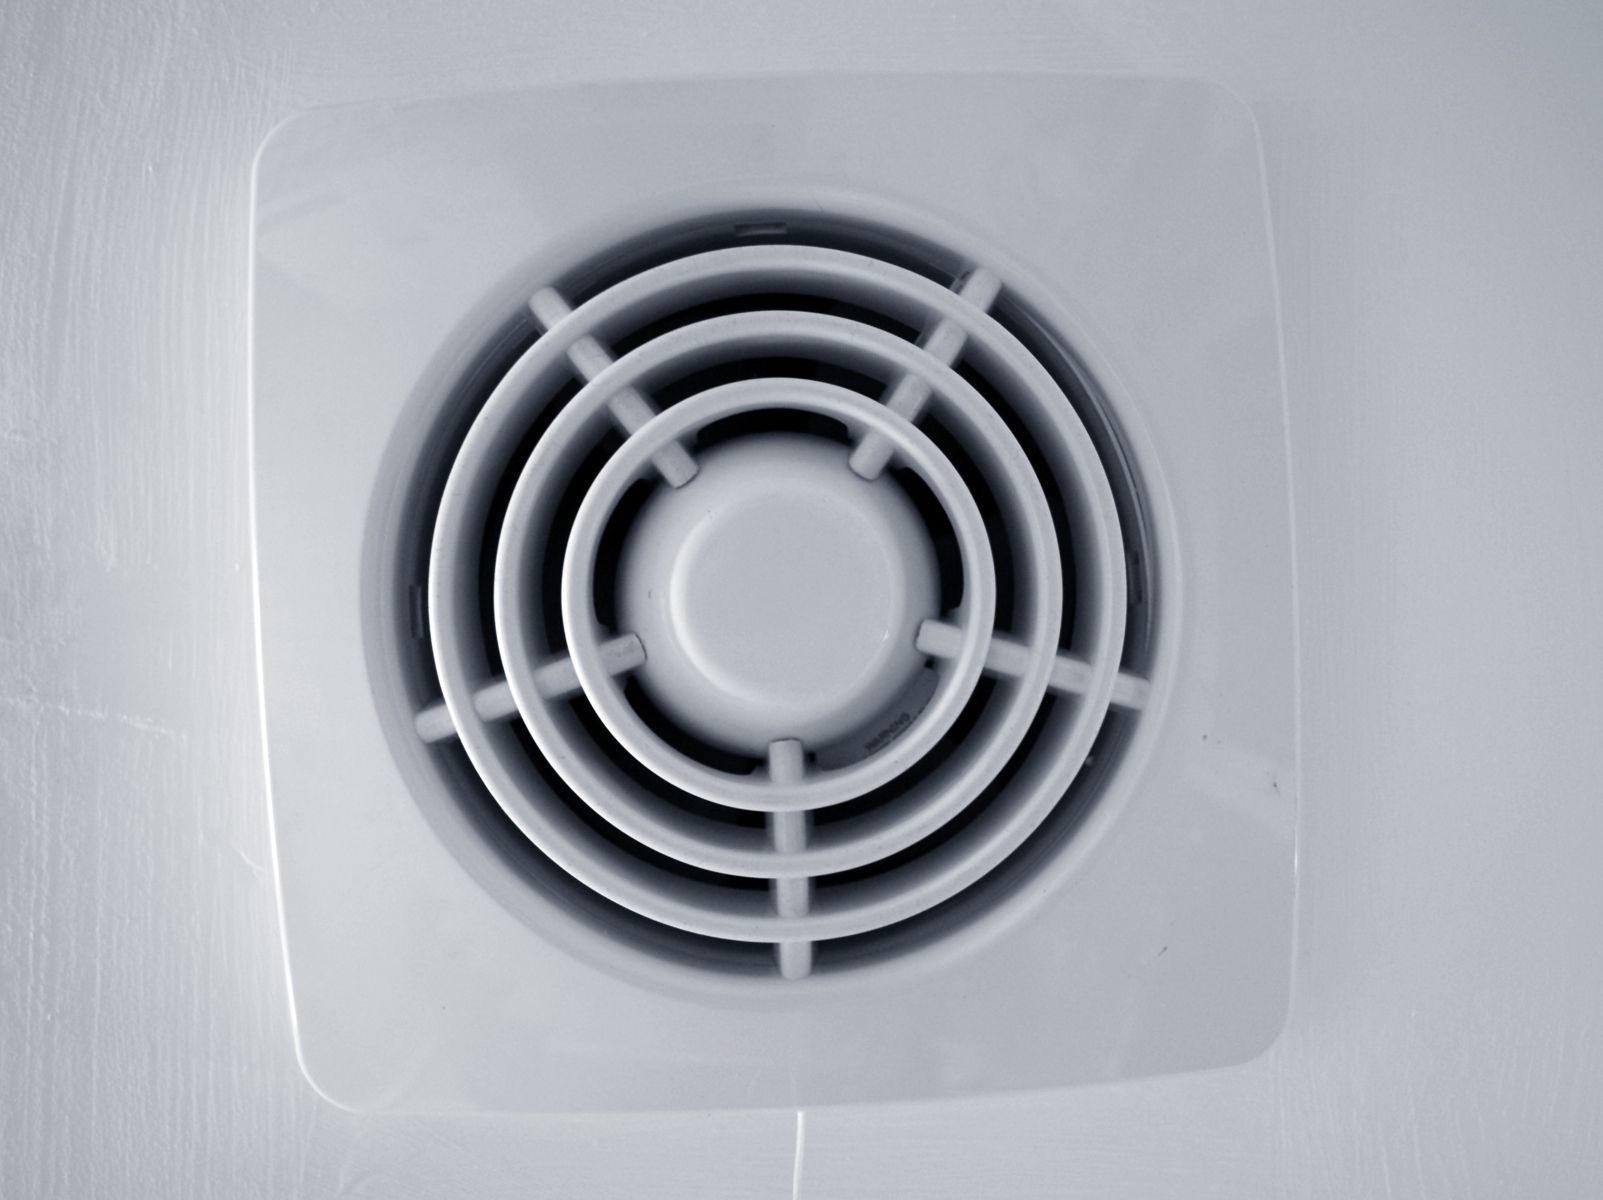 Bathroom Exhaust Fan Venting Code Basics intended for size 1603 X 1200